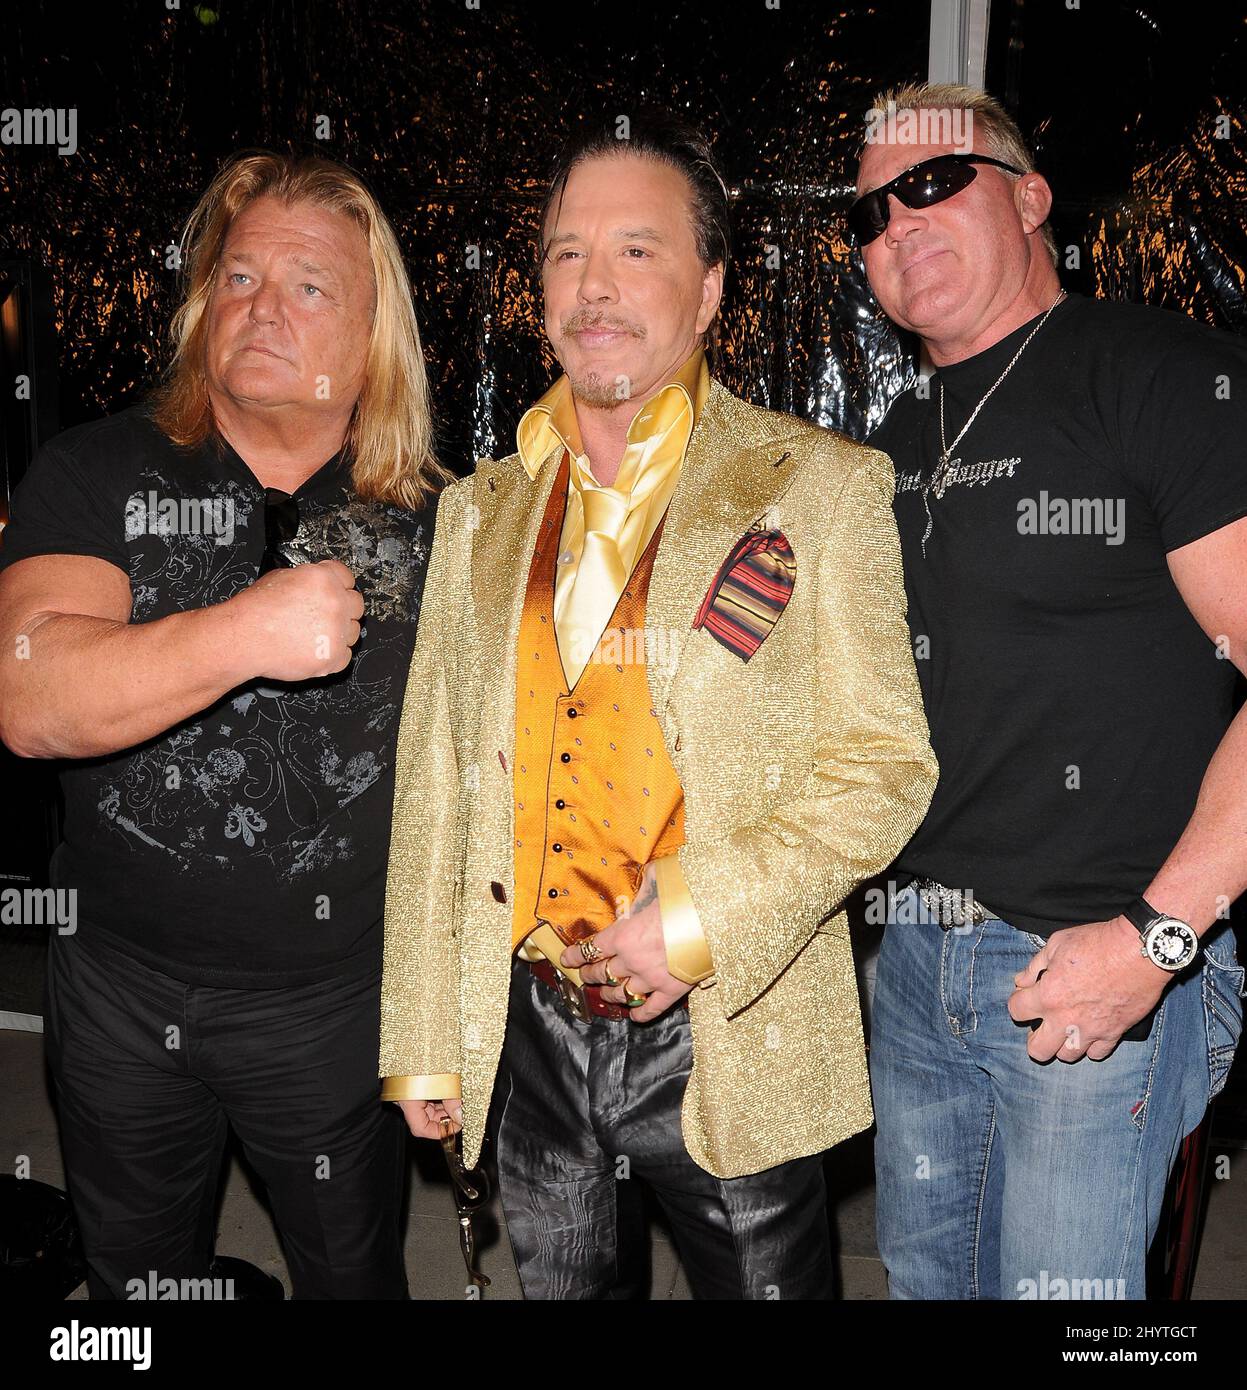 Greg 'The Hammer' Valentine, Mickey Rourke and Brutus Beefcake at The Wrestler Los Angeles Premiere held at The Academy Theatre in Beverly Hills, CA. Stock Photo